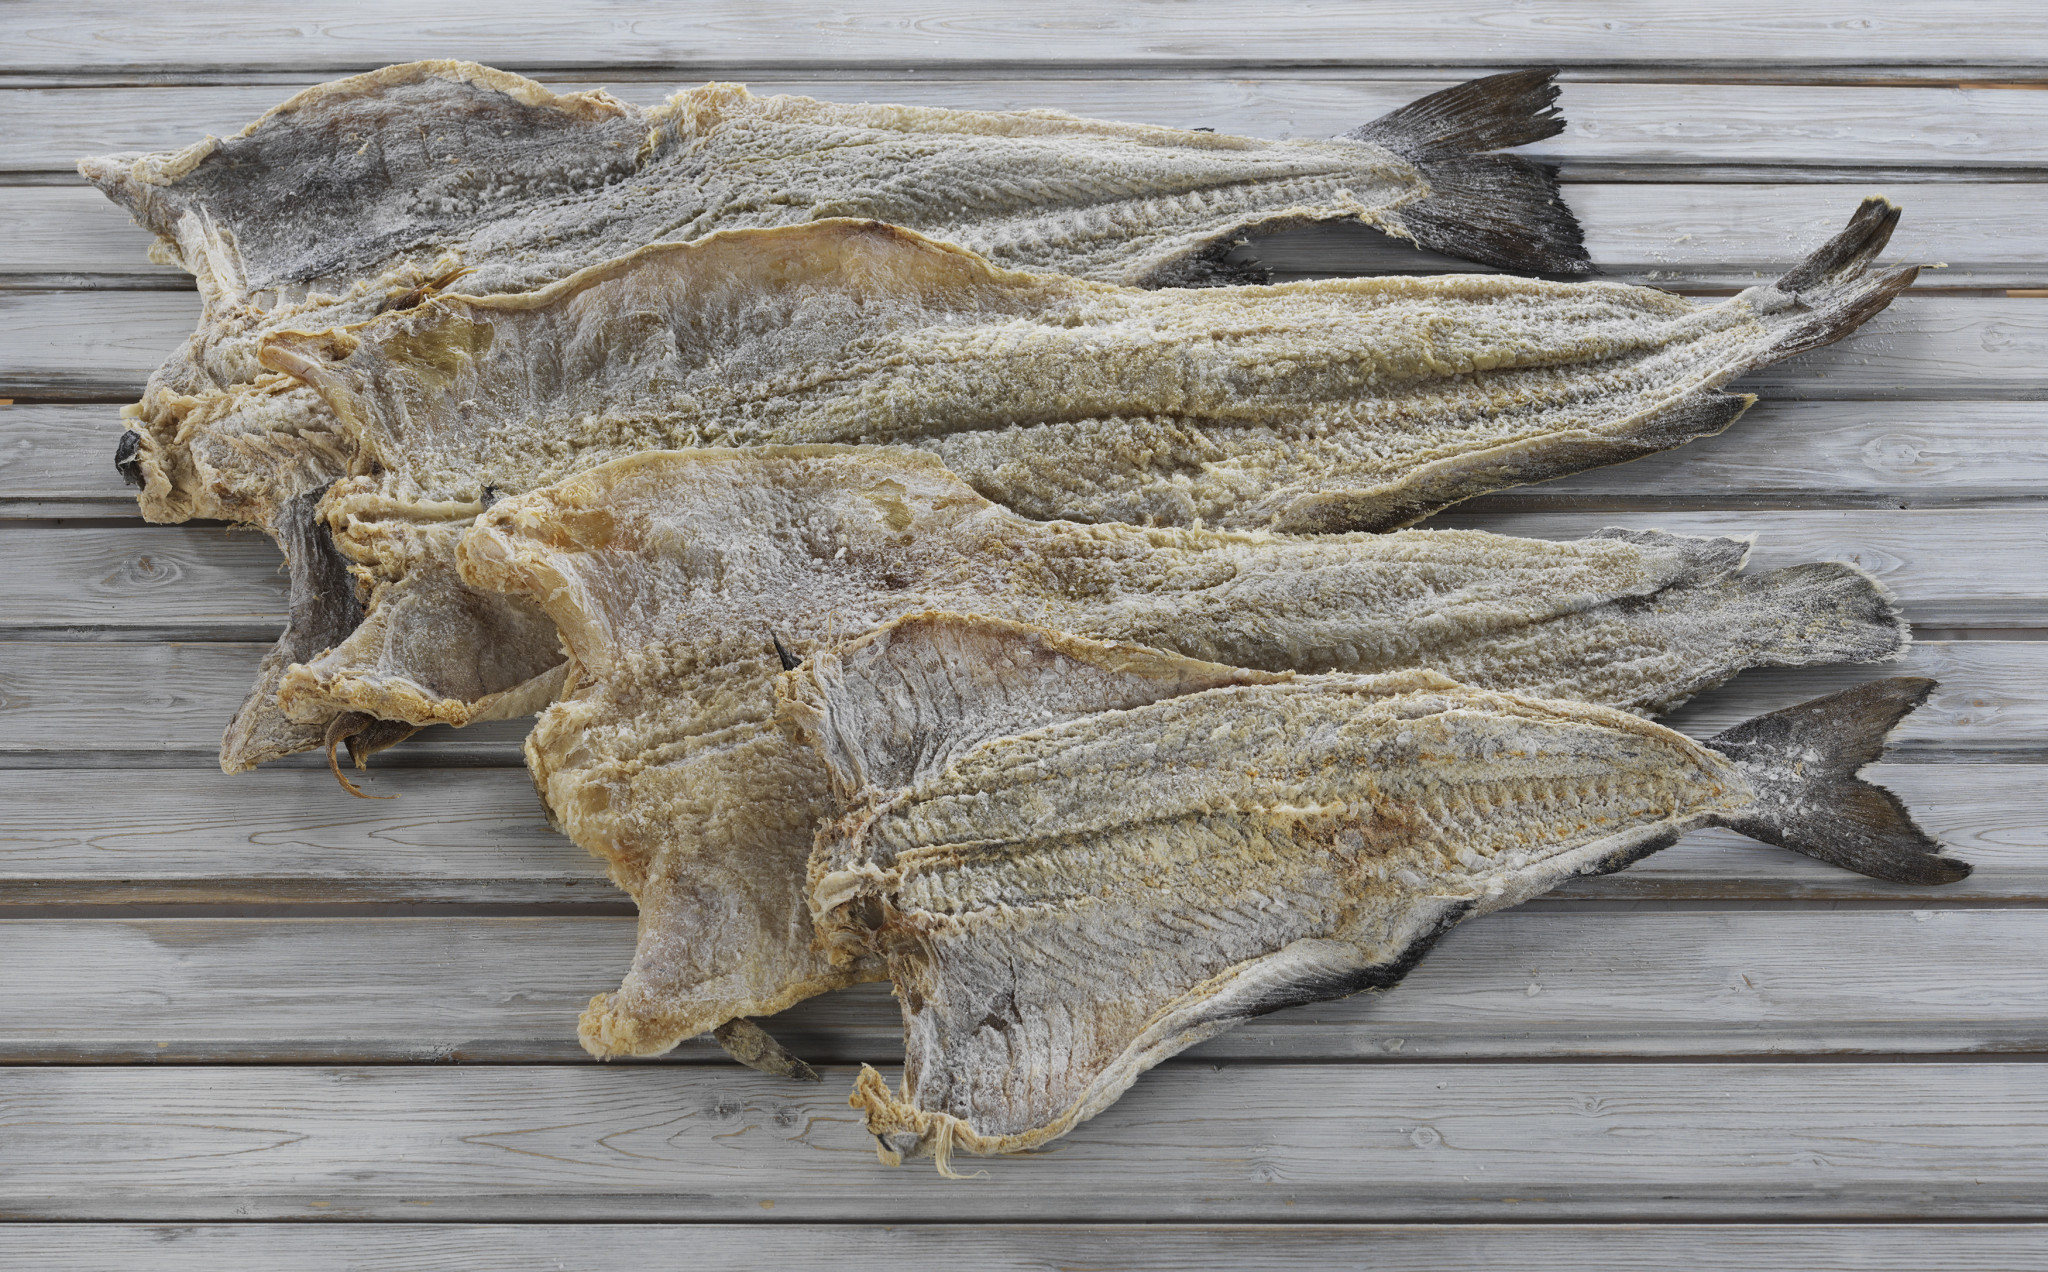 Norway has Record Cod Exports This Quarter, Driven by Strong Demand for Clipfish, Saltfish